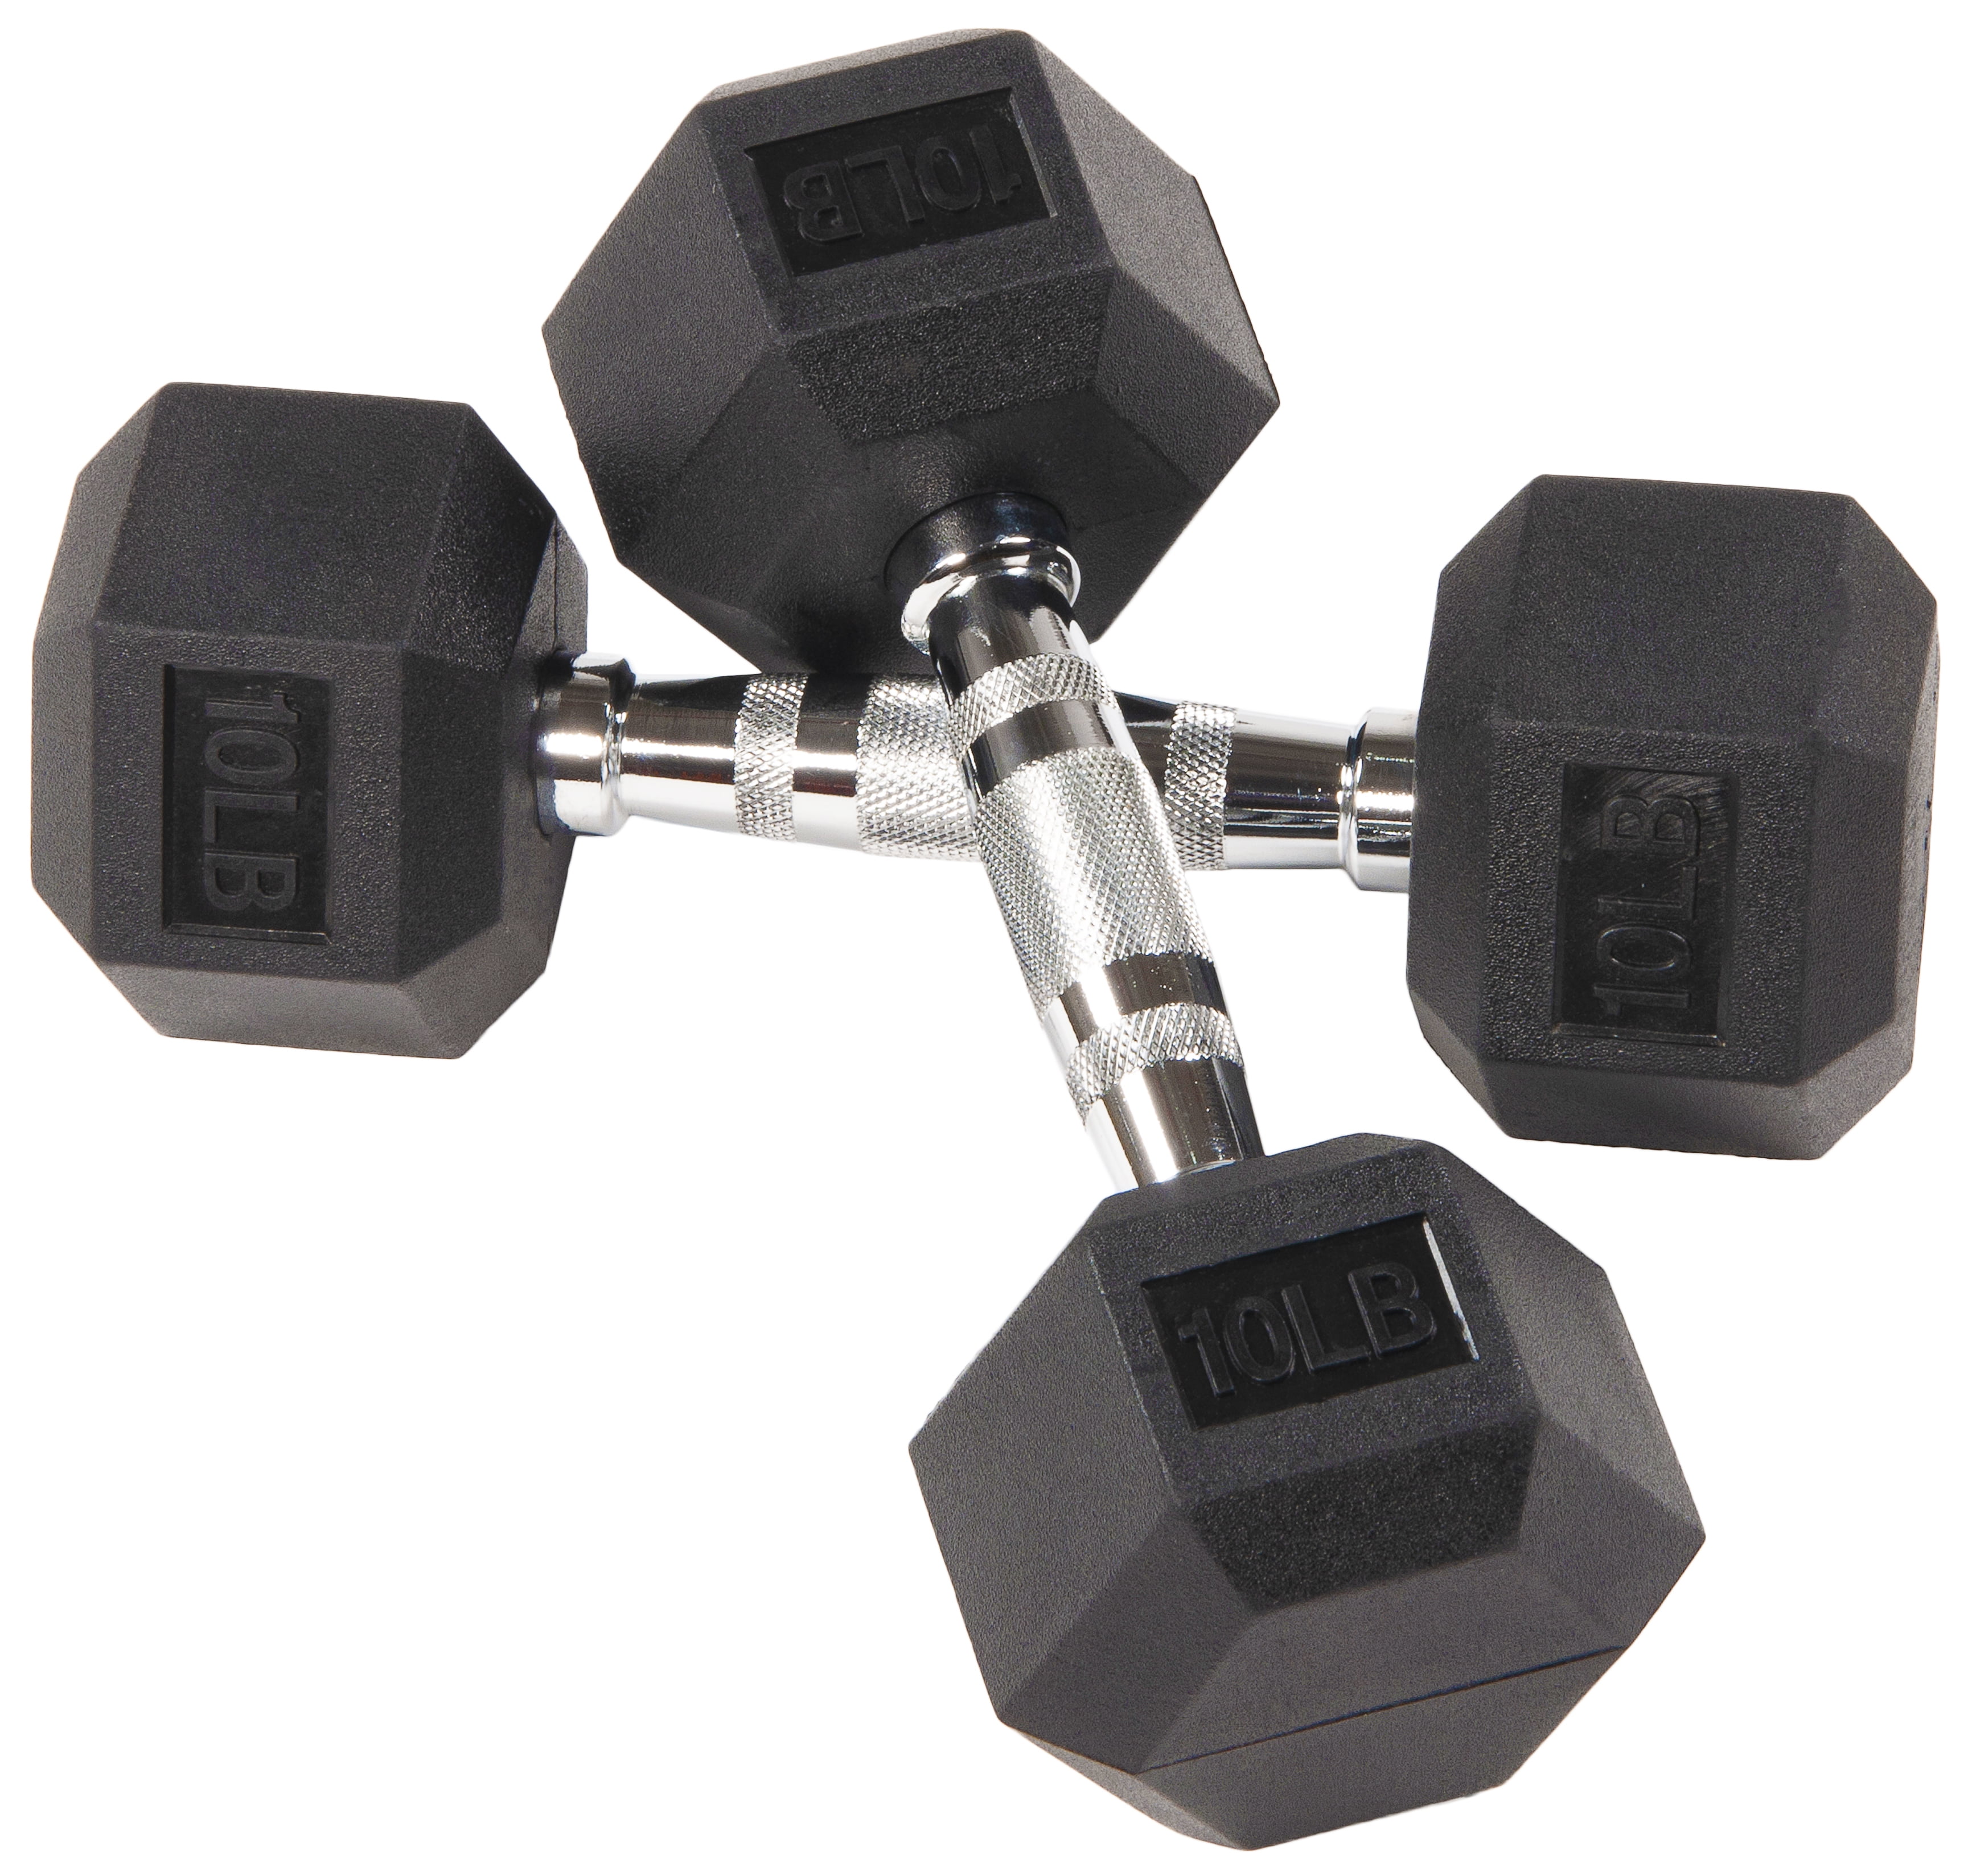 Details about   COATED RUBBER HEX Lifting Hand Weight 5 10 50 100 Lb Dumbbell CAP Barbell Home 